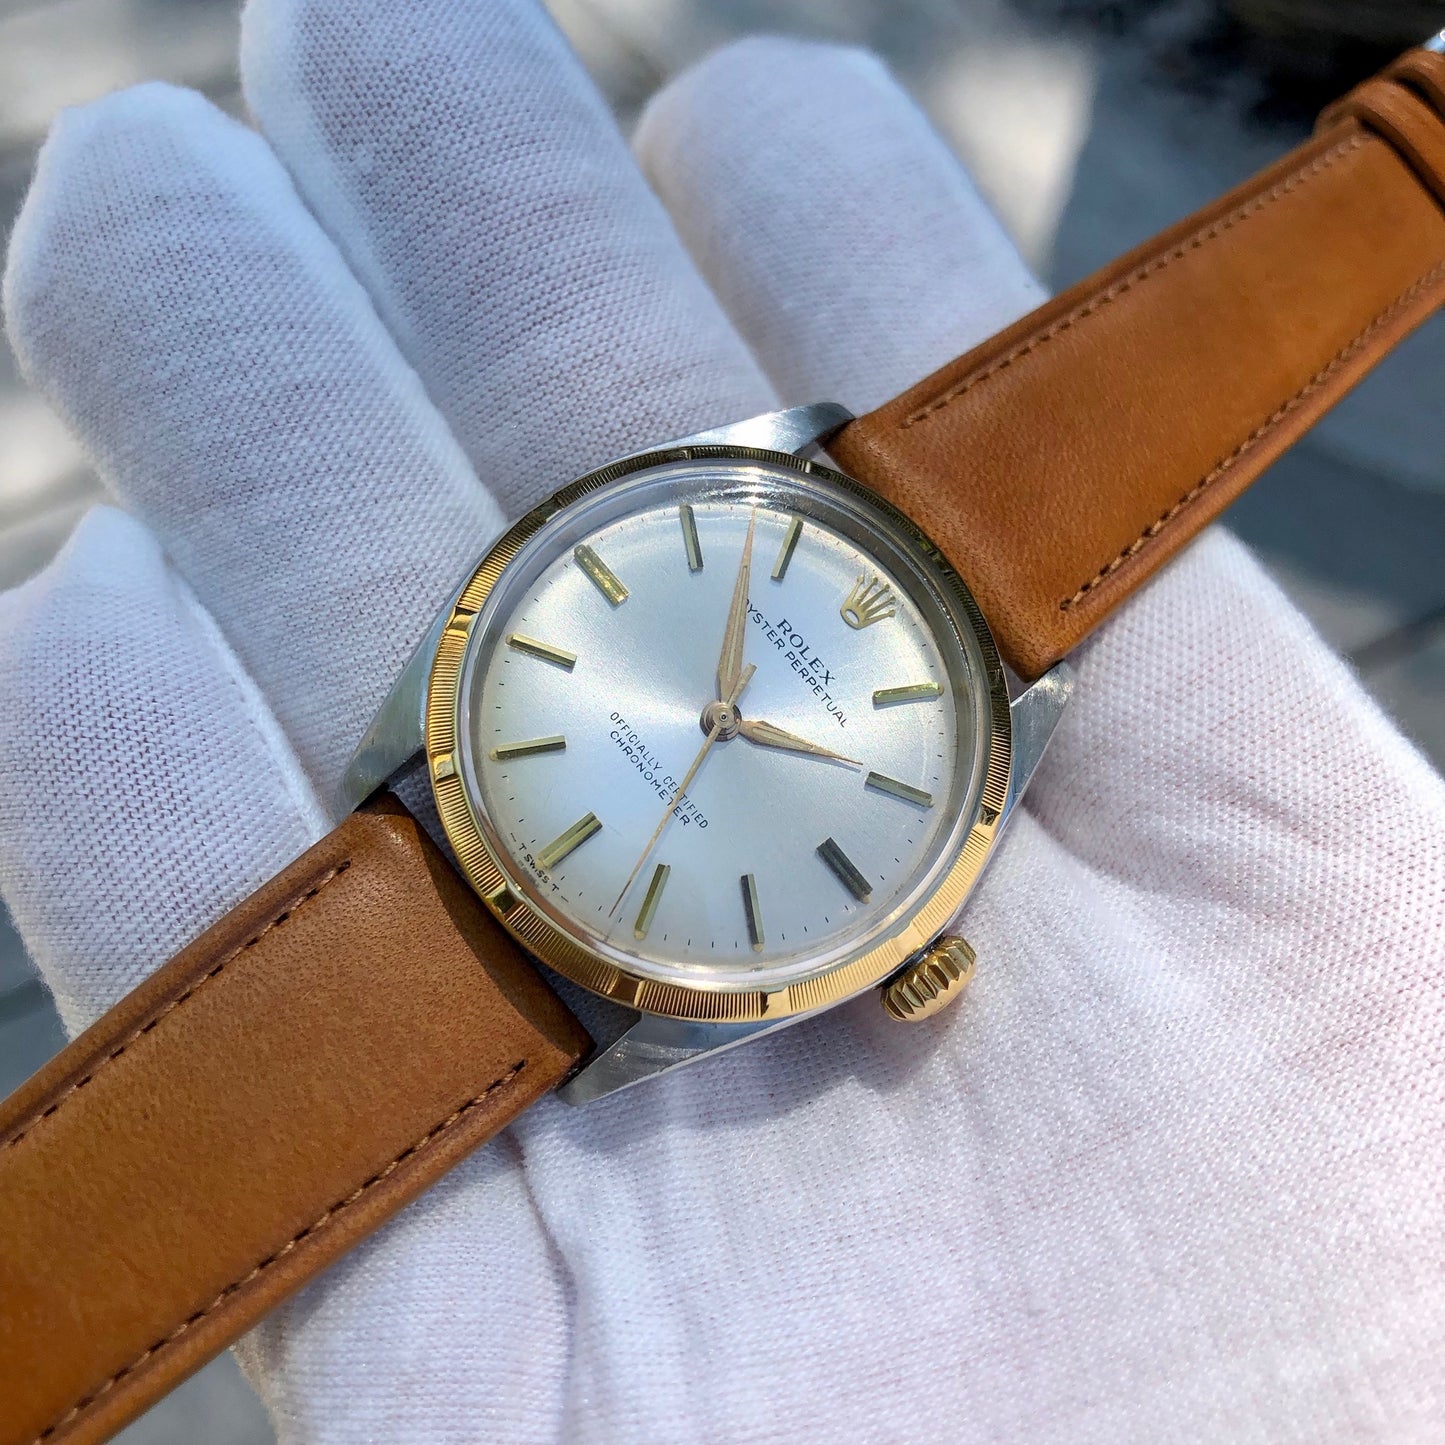 Vintage Rolex Oyster Perpetual 6285 Two Tone Stainless Steel Gold Silver Automatic Wristwatch Circa 1958 - Hashtag Watch Company